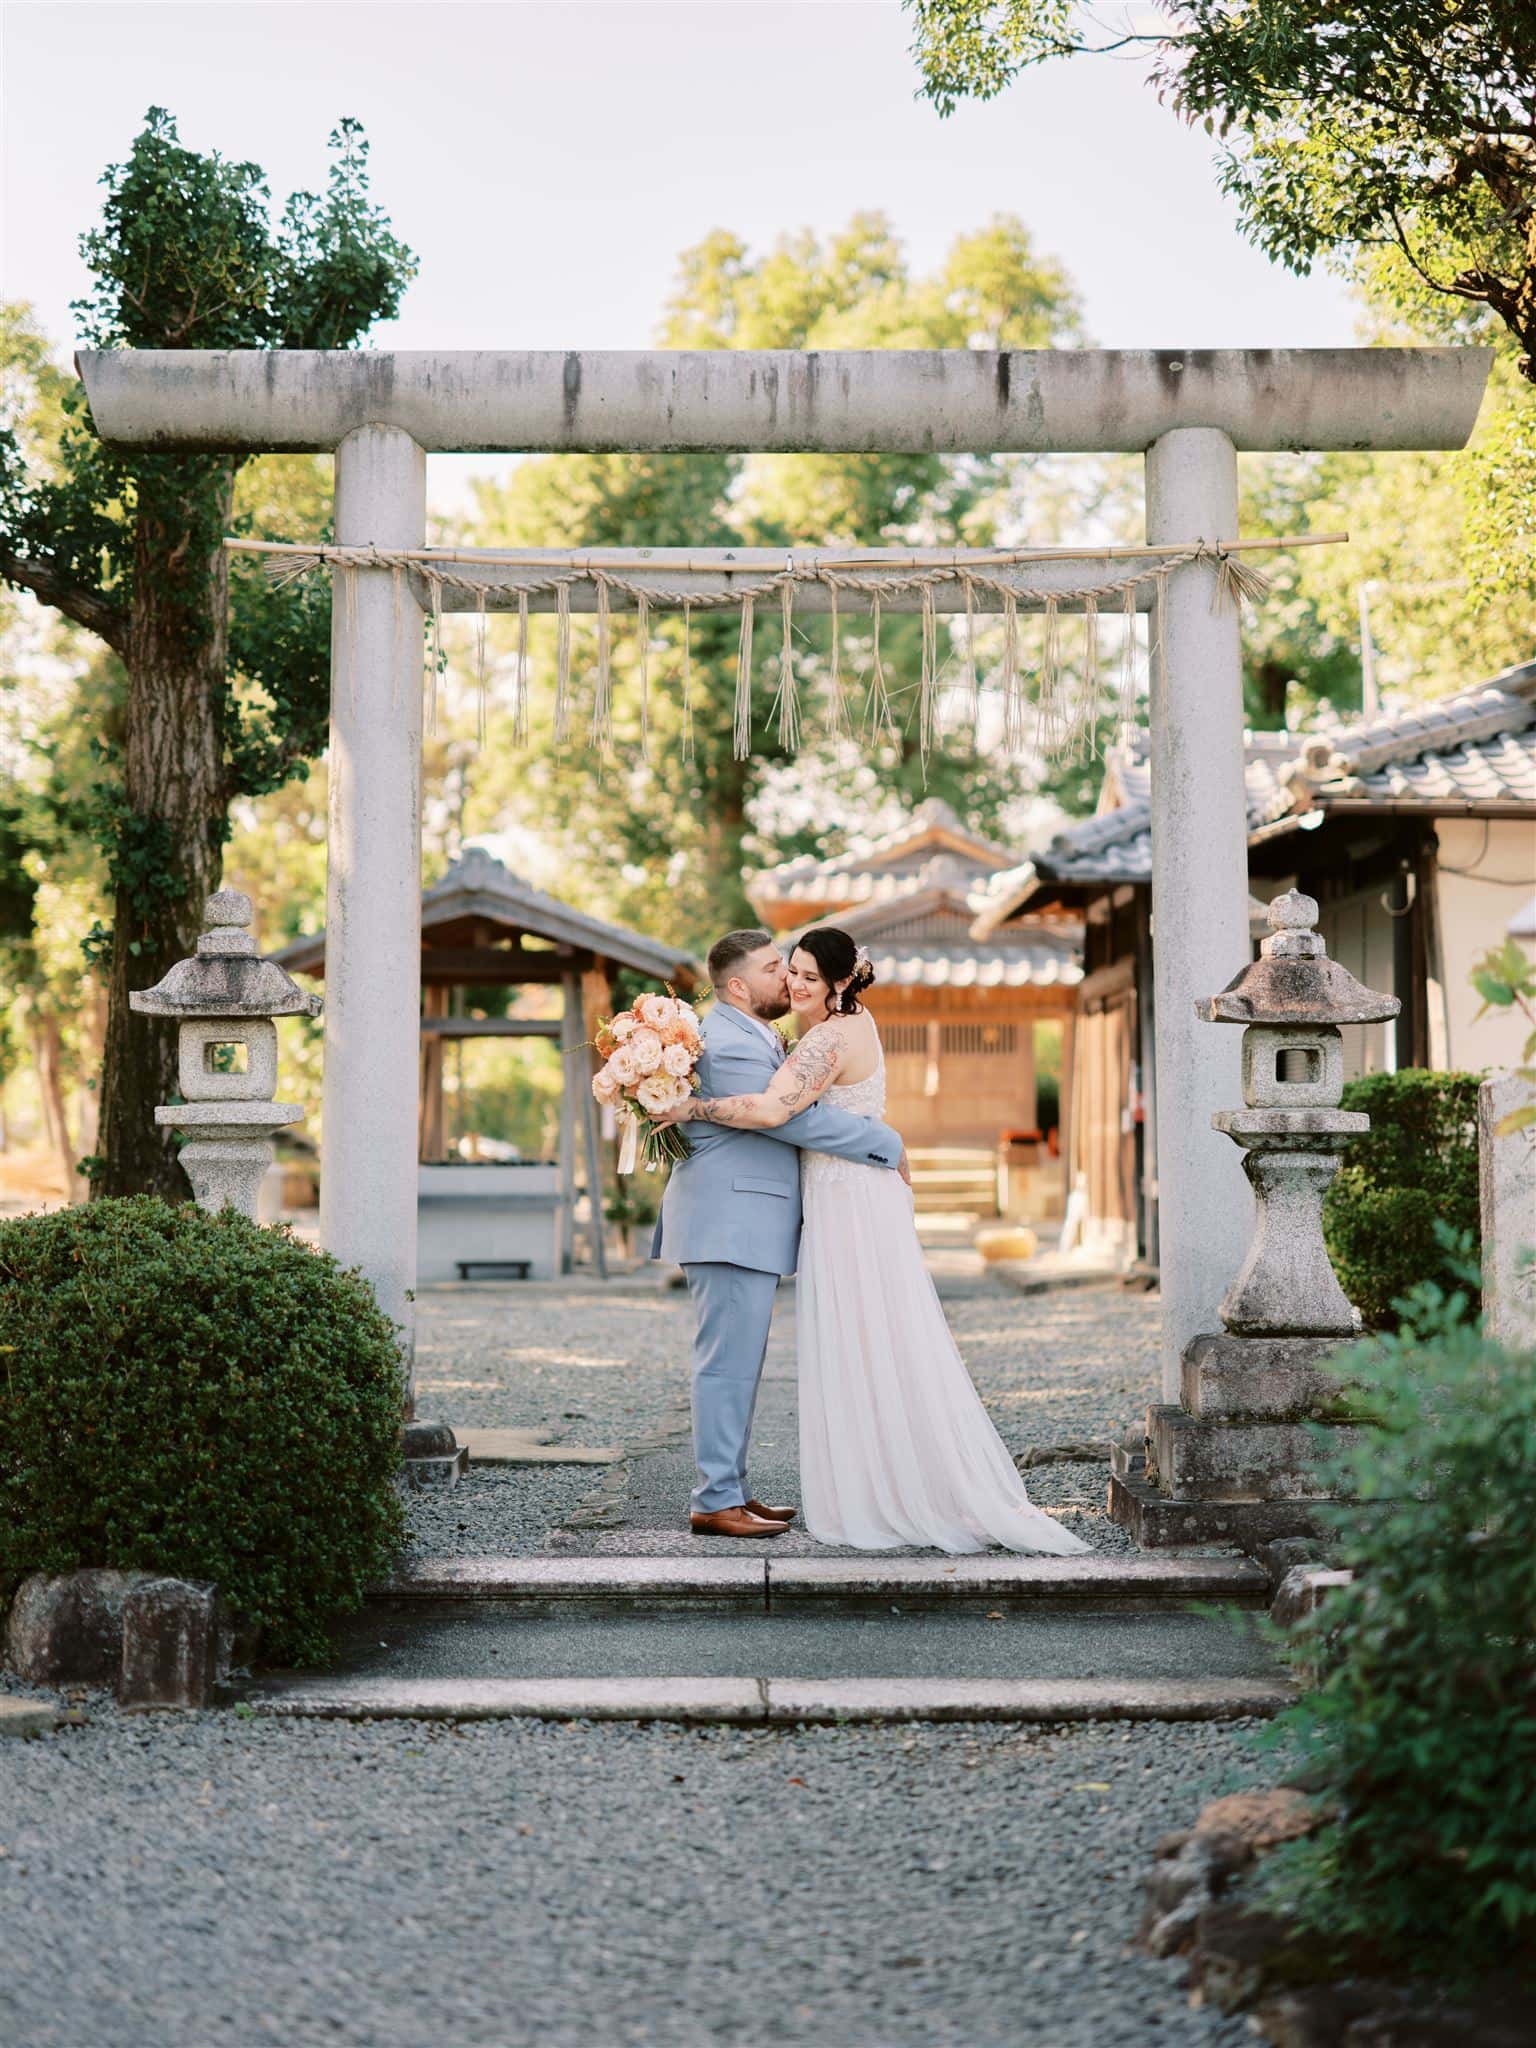 Japan Elopement Wedding Photographer, Planner & Videographer | A Queenstown Heli-Wedding & Elopement Package capturing a breathtaking moment of a bride and groom kissing in front of a Japanese torii gate.